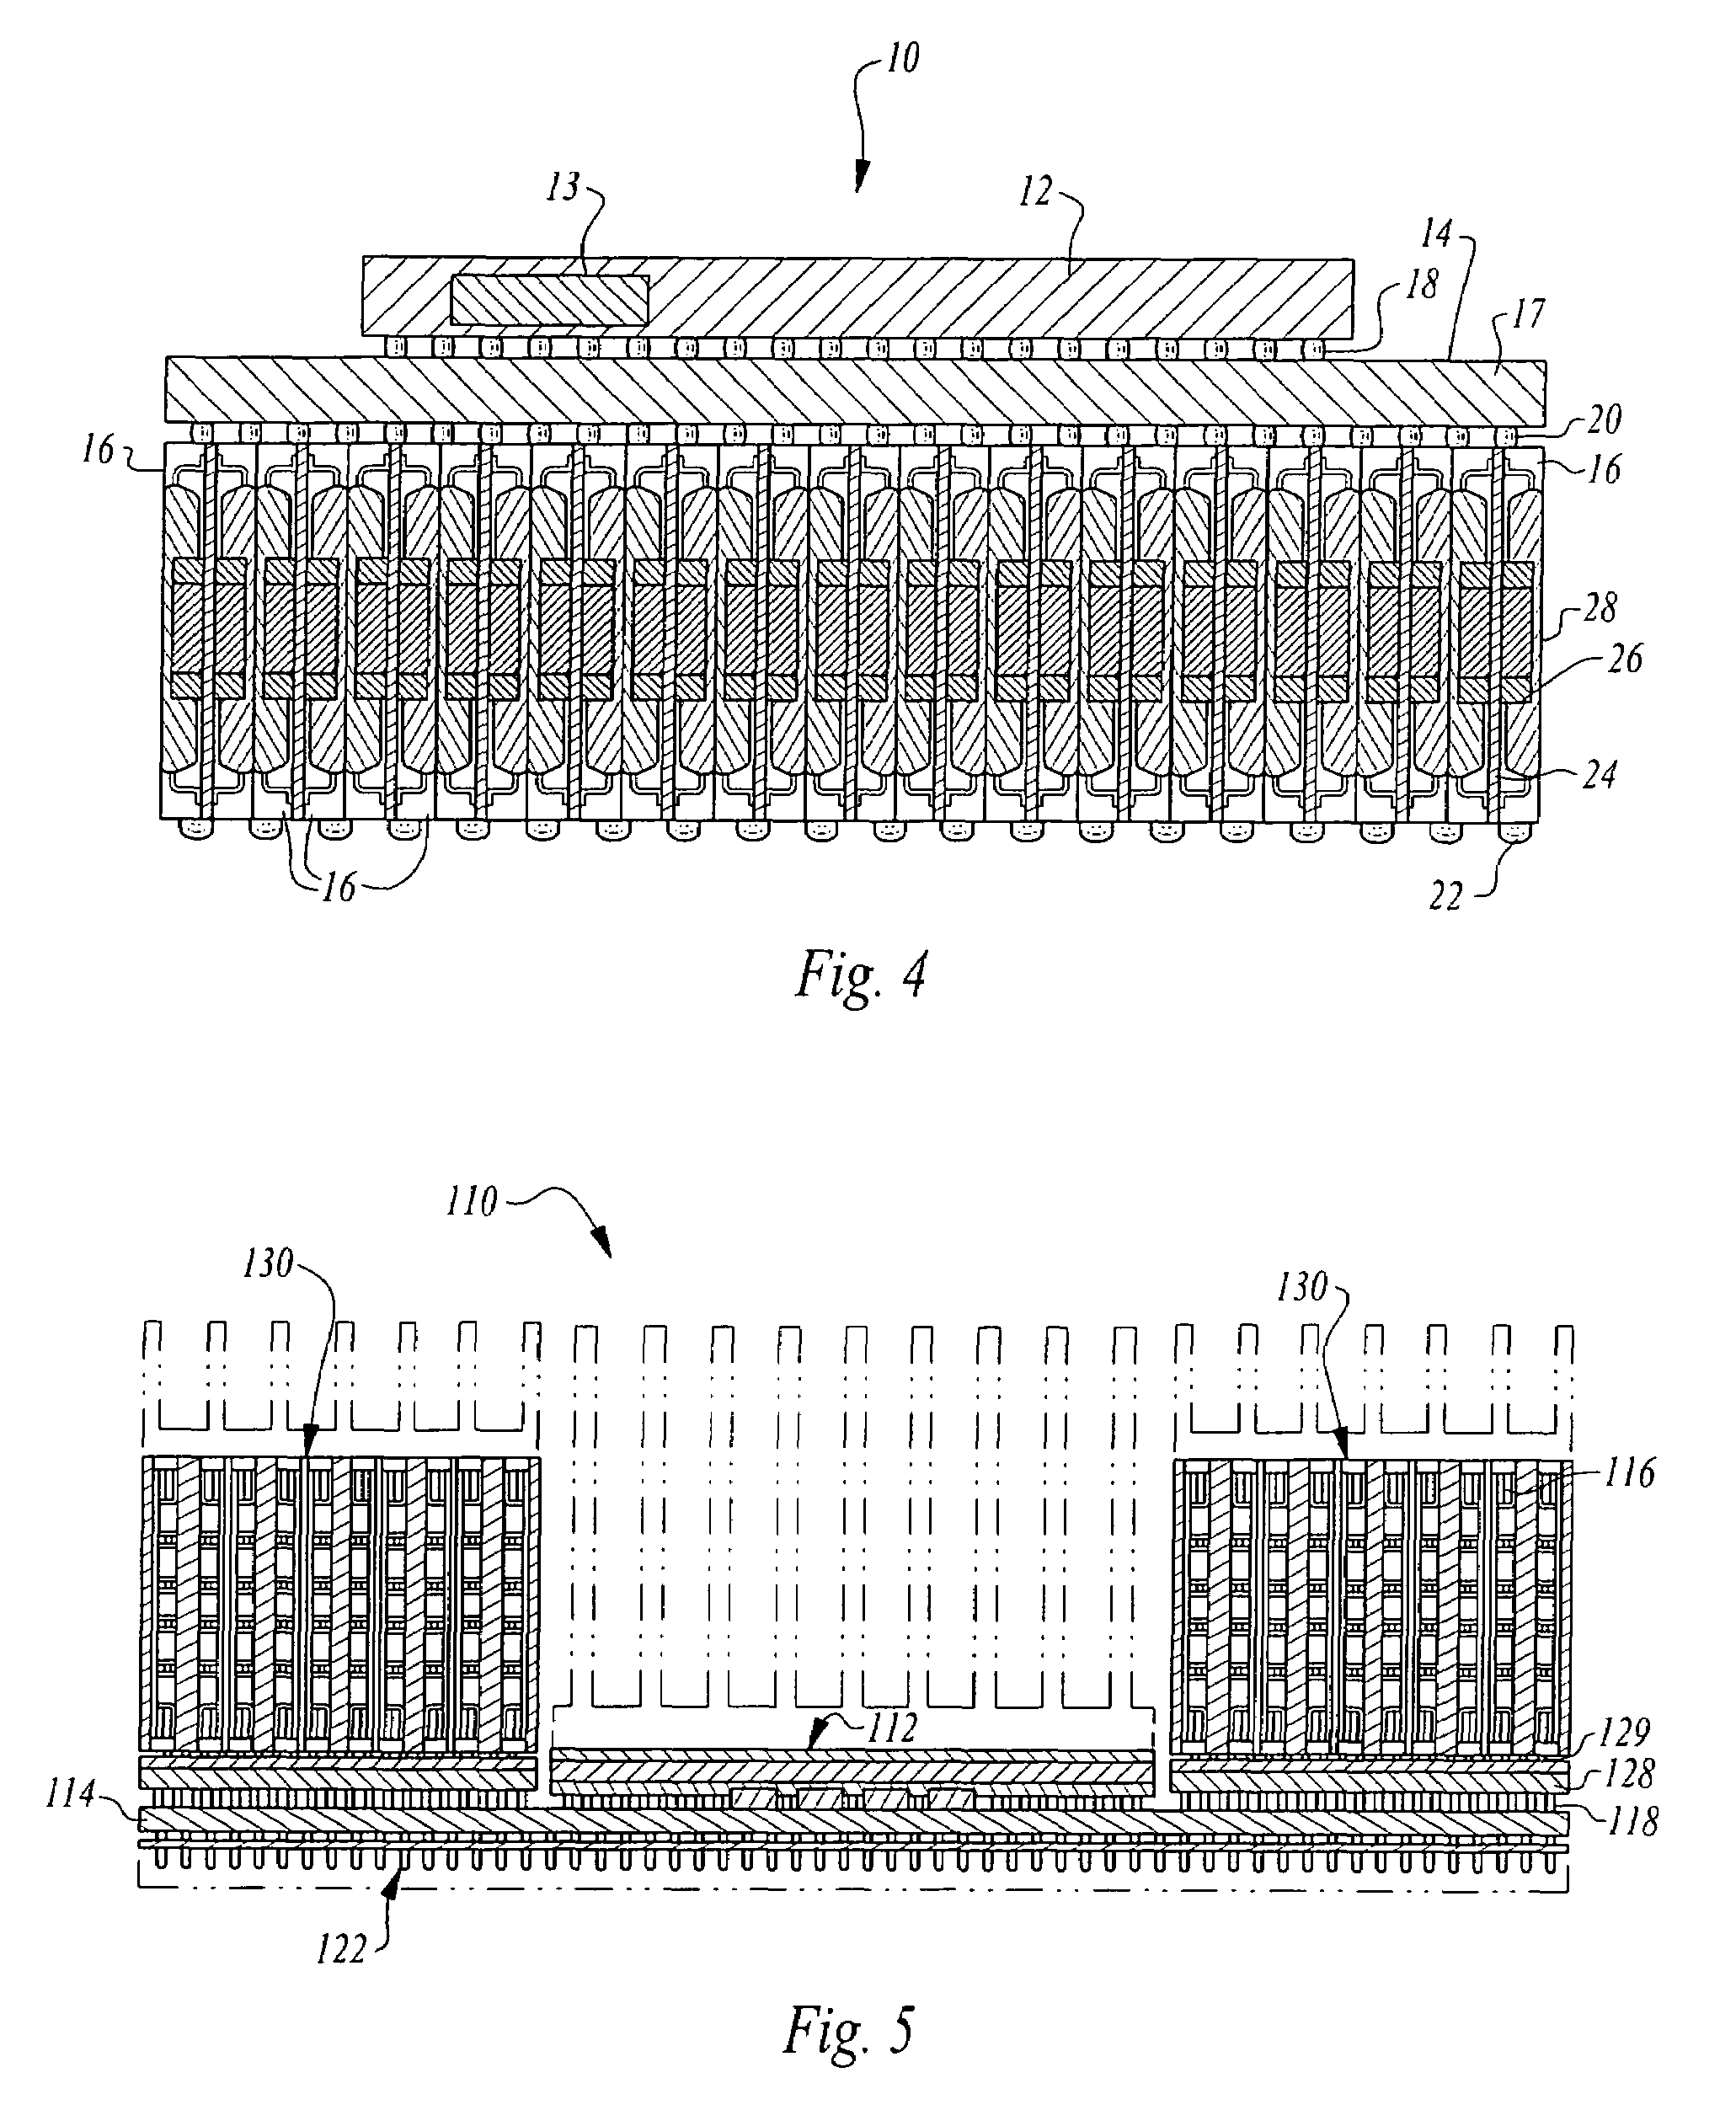 Field programmable gate array utilizing dedicated memory stacks in a vertical layer format